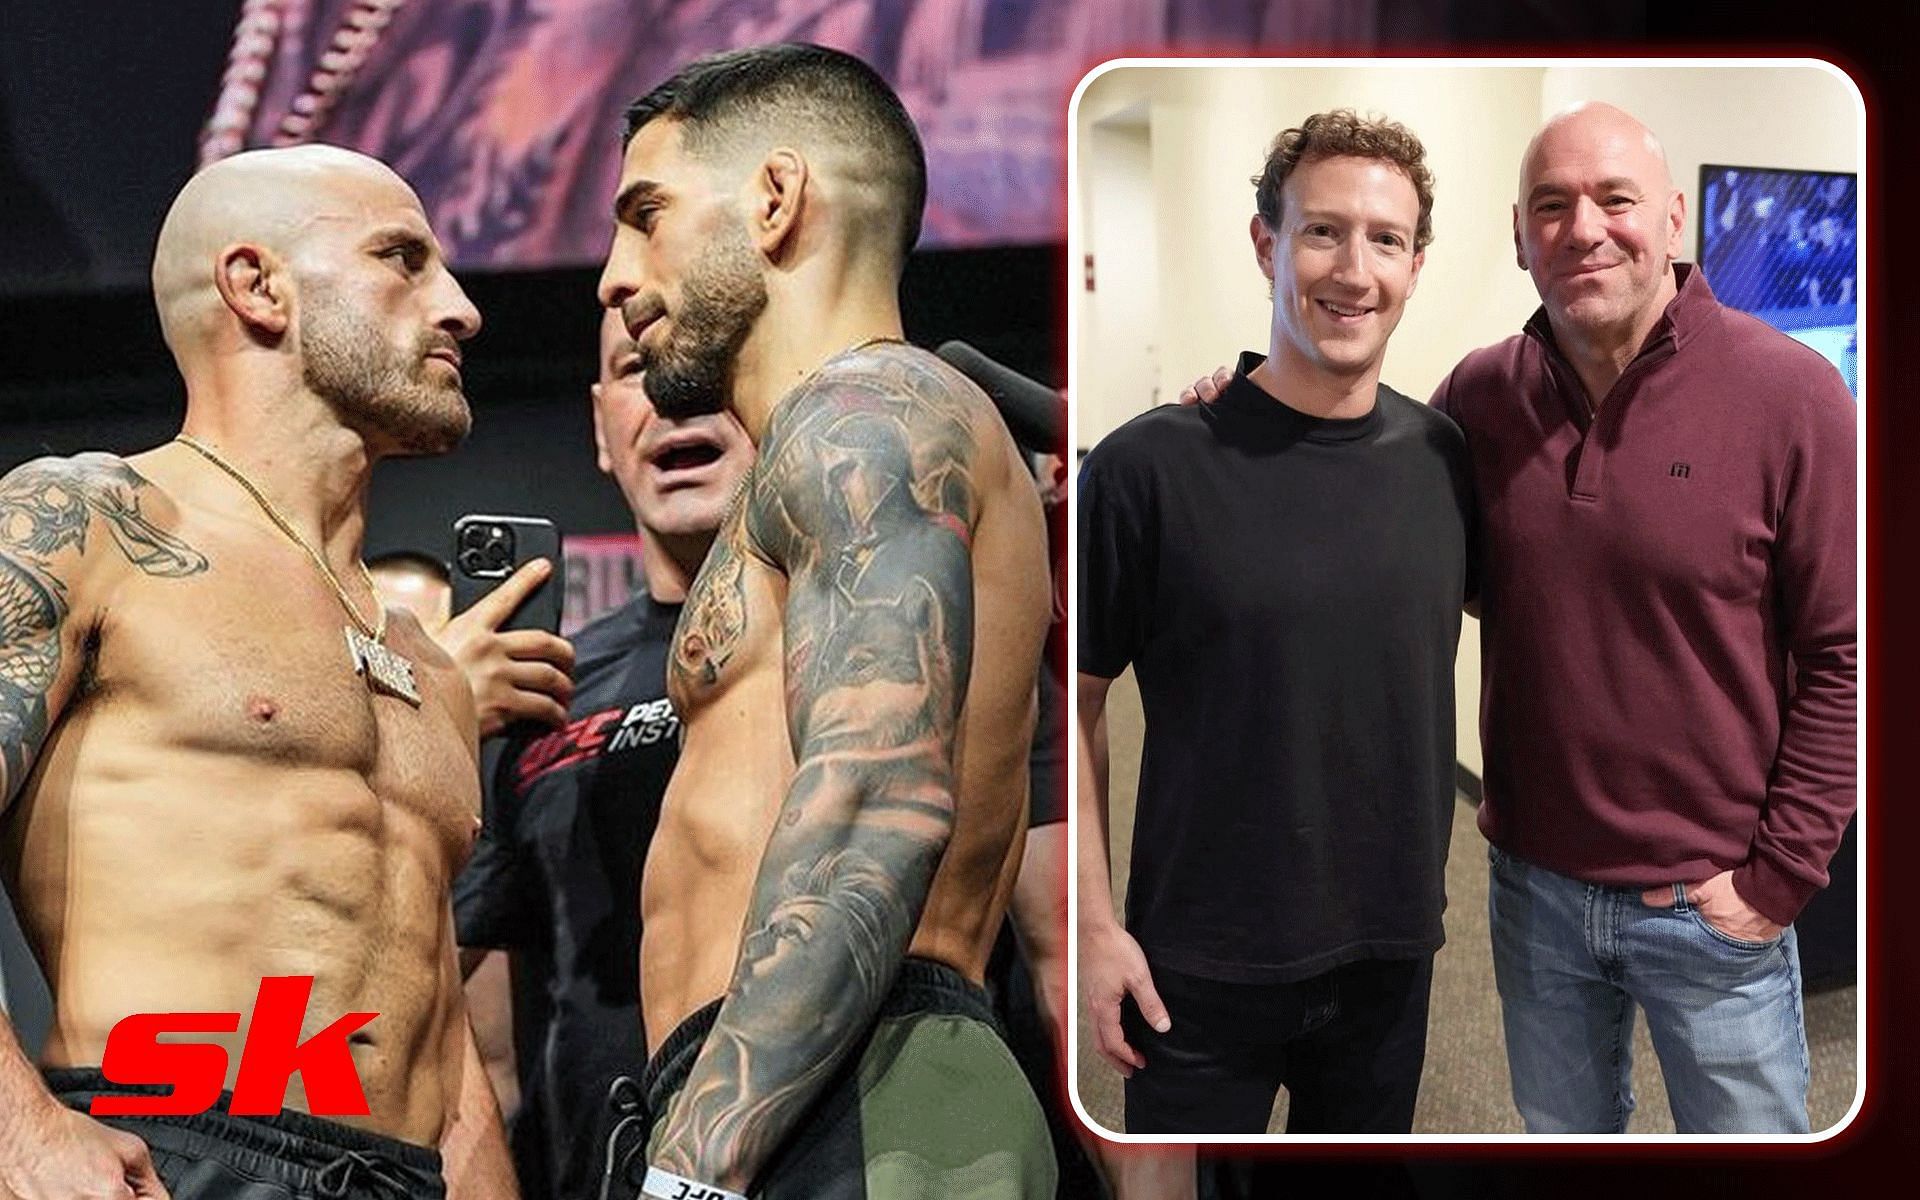 Mark Zuckerberg is present inside the arena and shares his prediction for ufc 298 main event